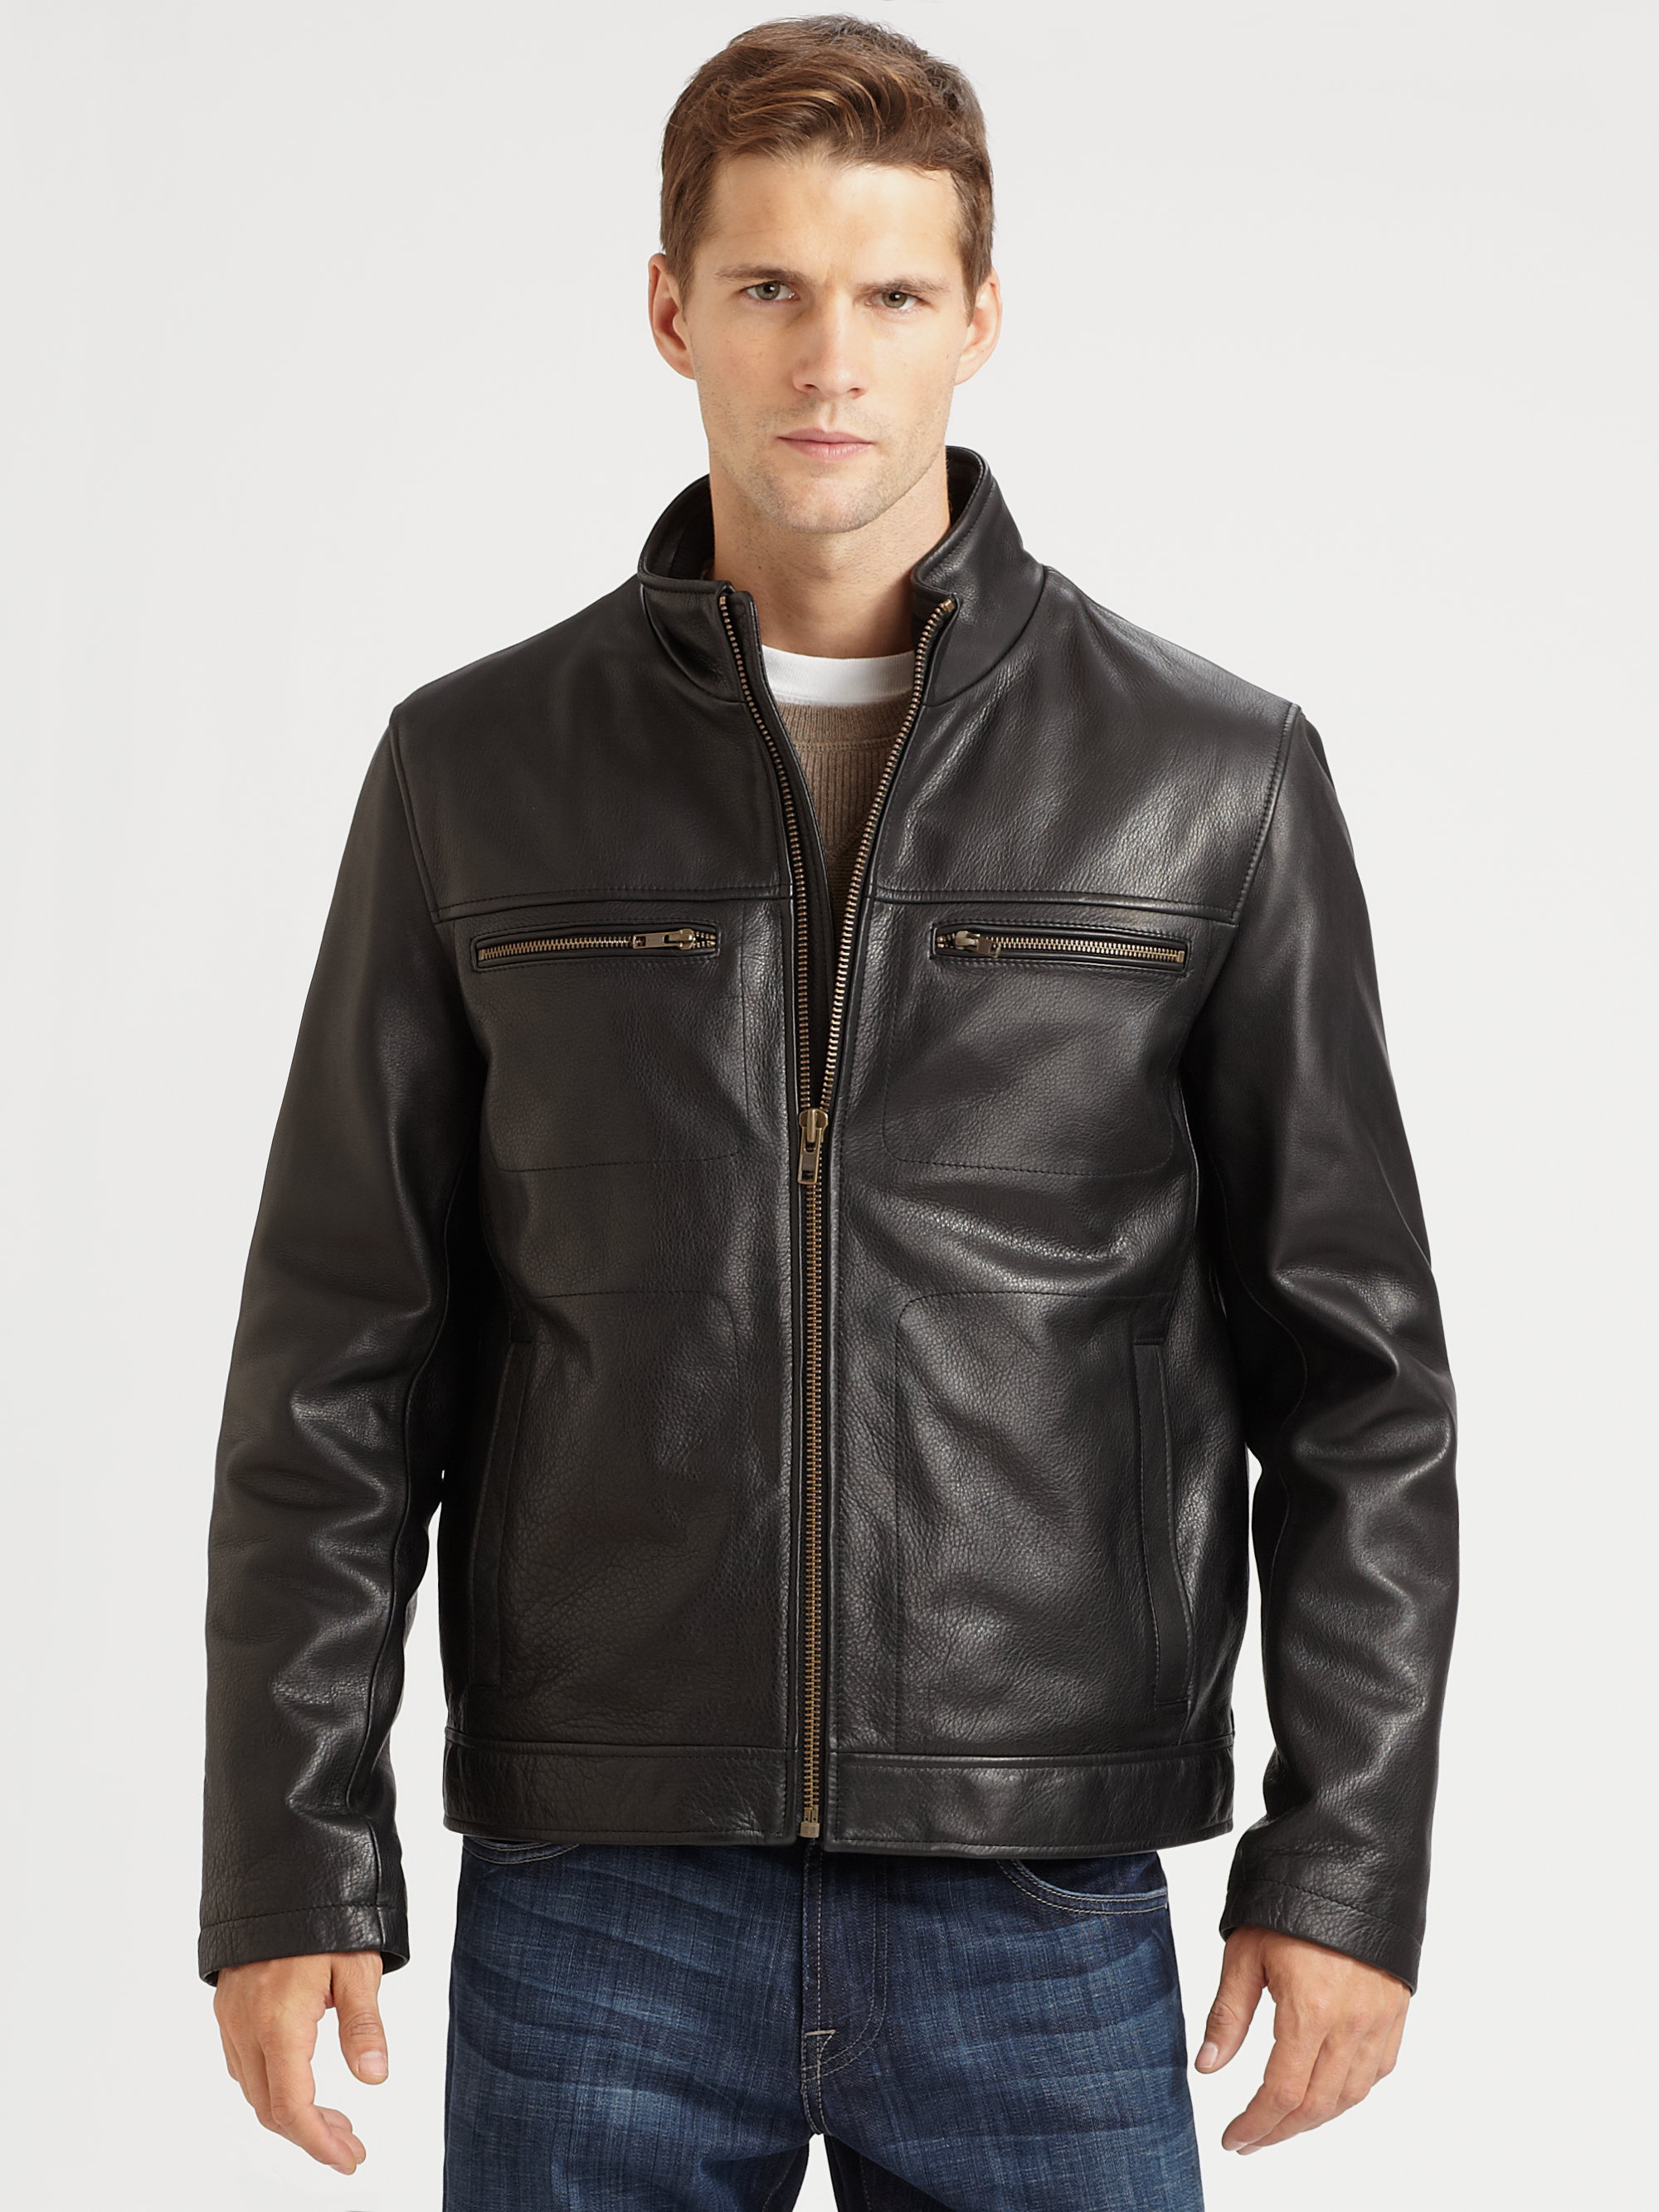 Cole Haan Grainy Leather Moto Jacket in Black for Men Lyst